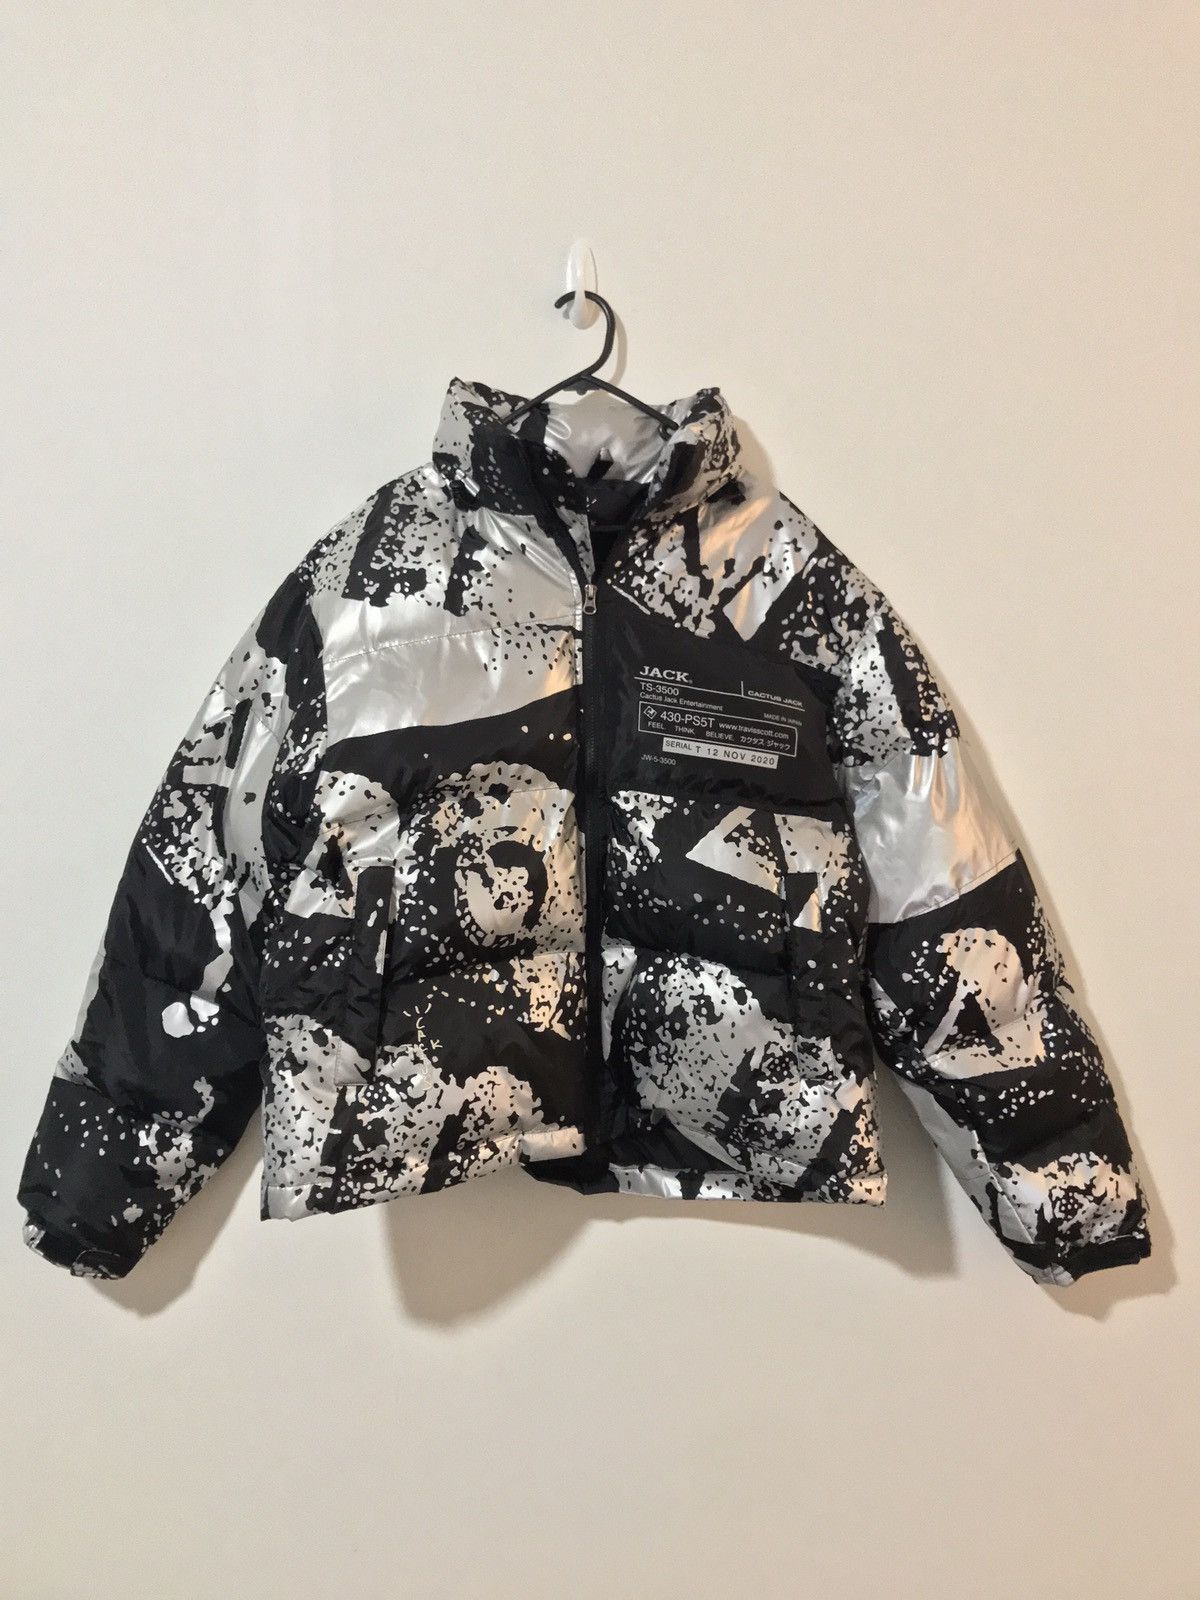 Cactus Jack by Travis Scott PS5 System Reflective Down Puffer